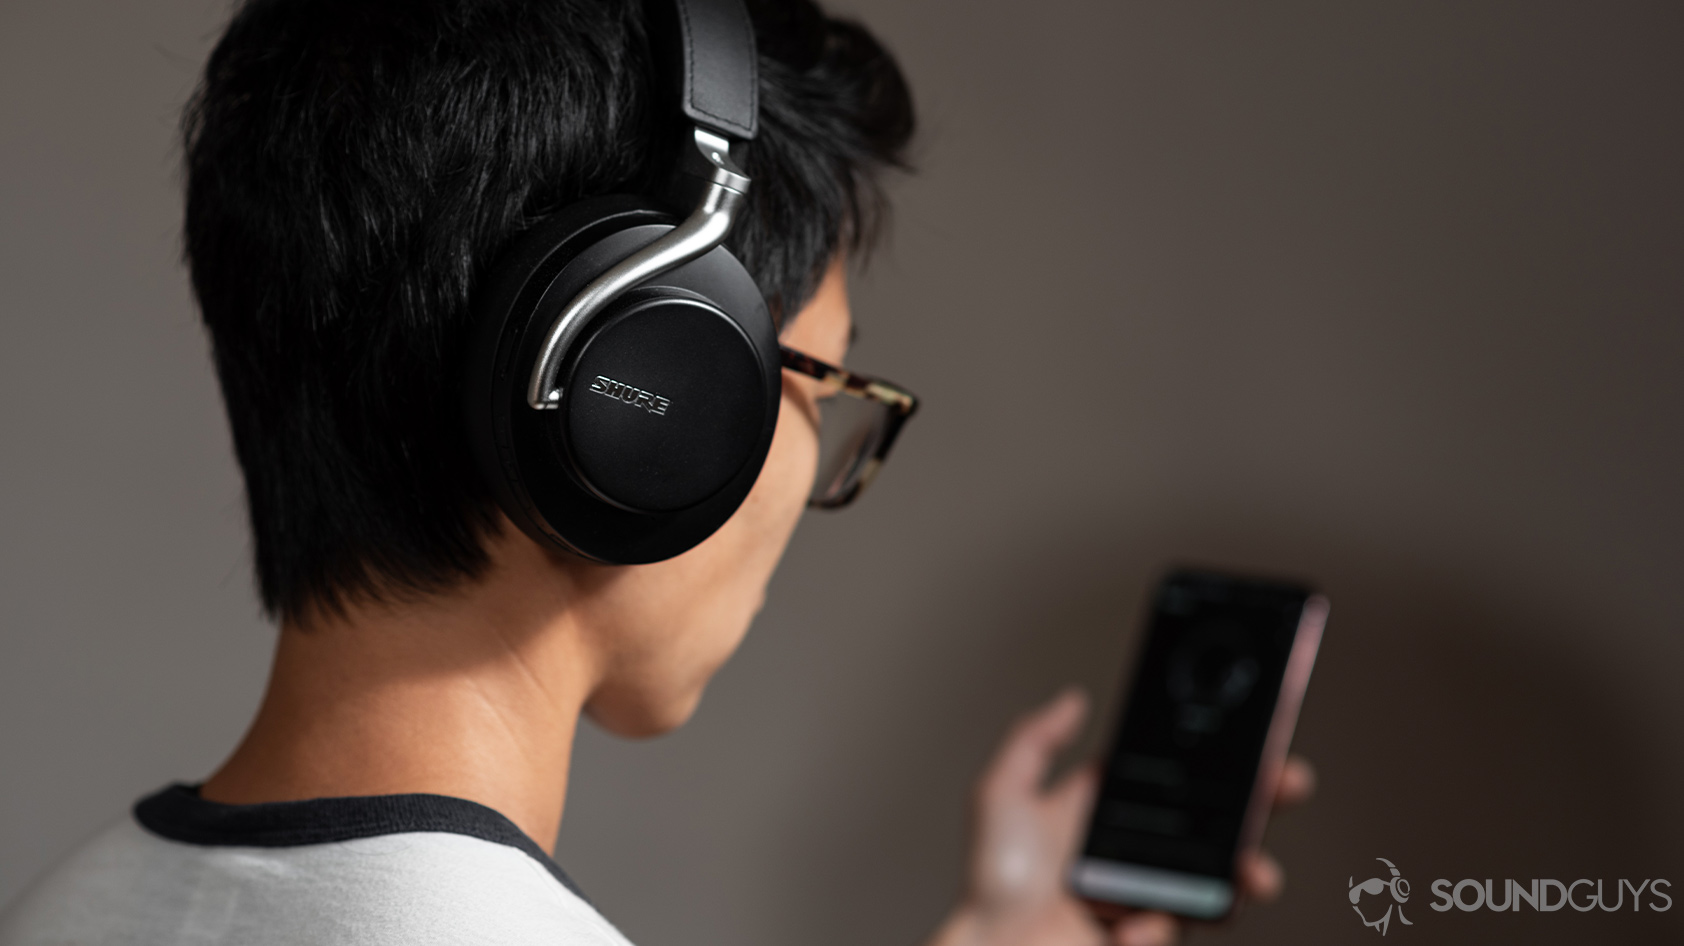 A picture of a woman wearing the Shure AONIC 50 noise canceling headphones and using the Shure PlayPlus headphone app.